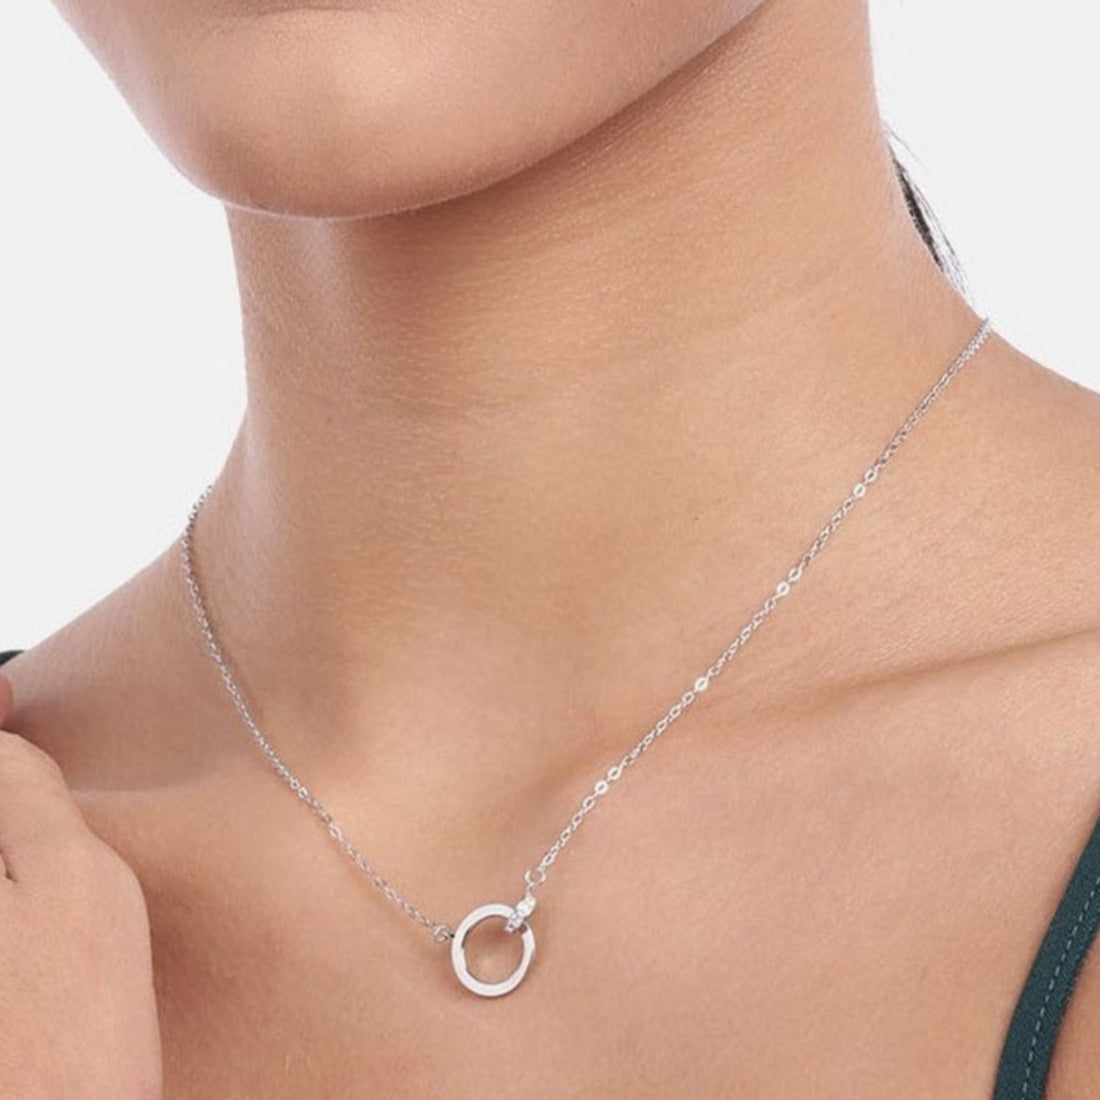 Circular Rhodium Plated 925 Sterling Silver Necklace